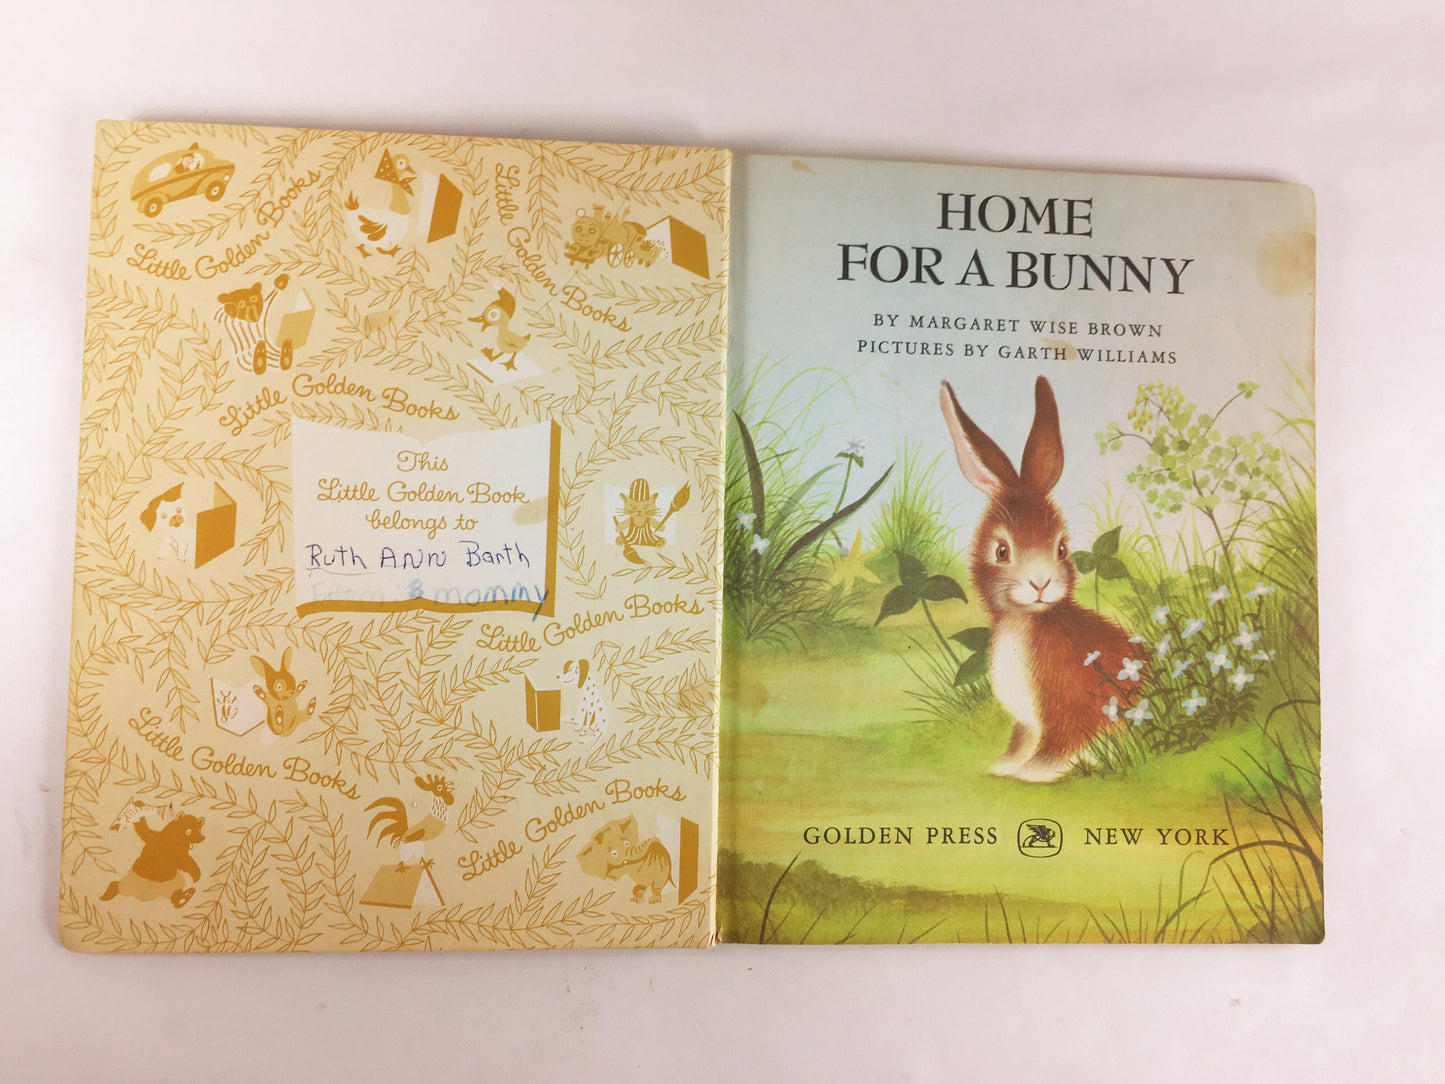 Margaret Wise Brown Home for a Bunny illustrated by Garth Williams. Little Golden Book circa 1961 vintage early printing.